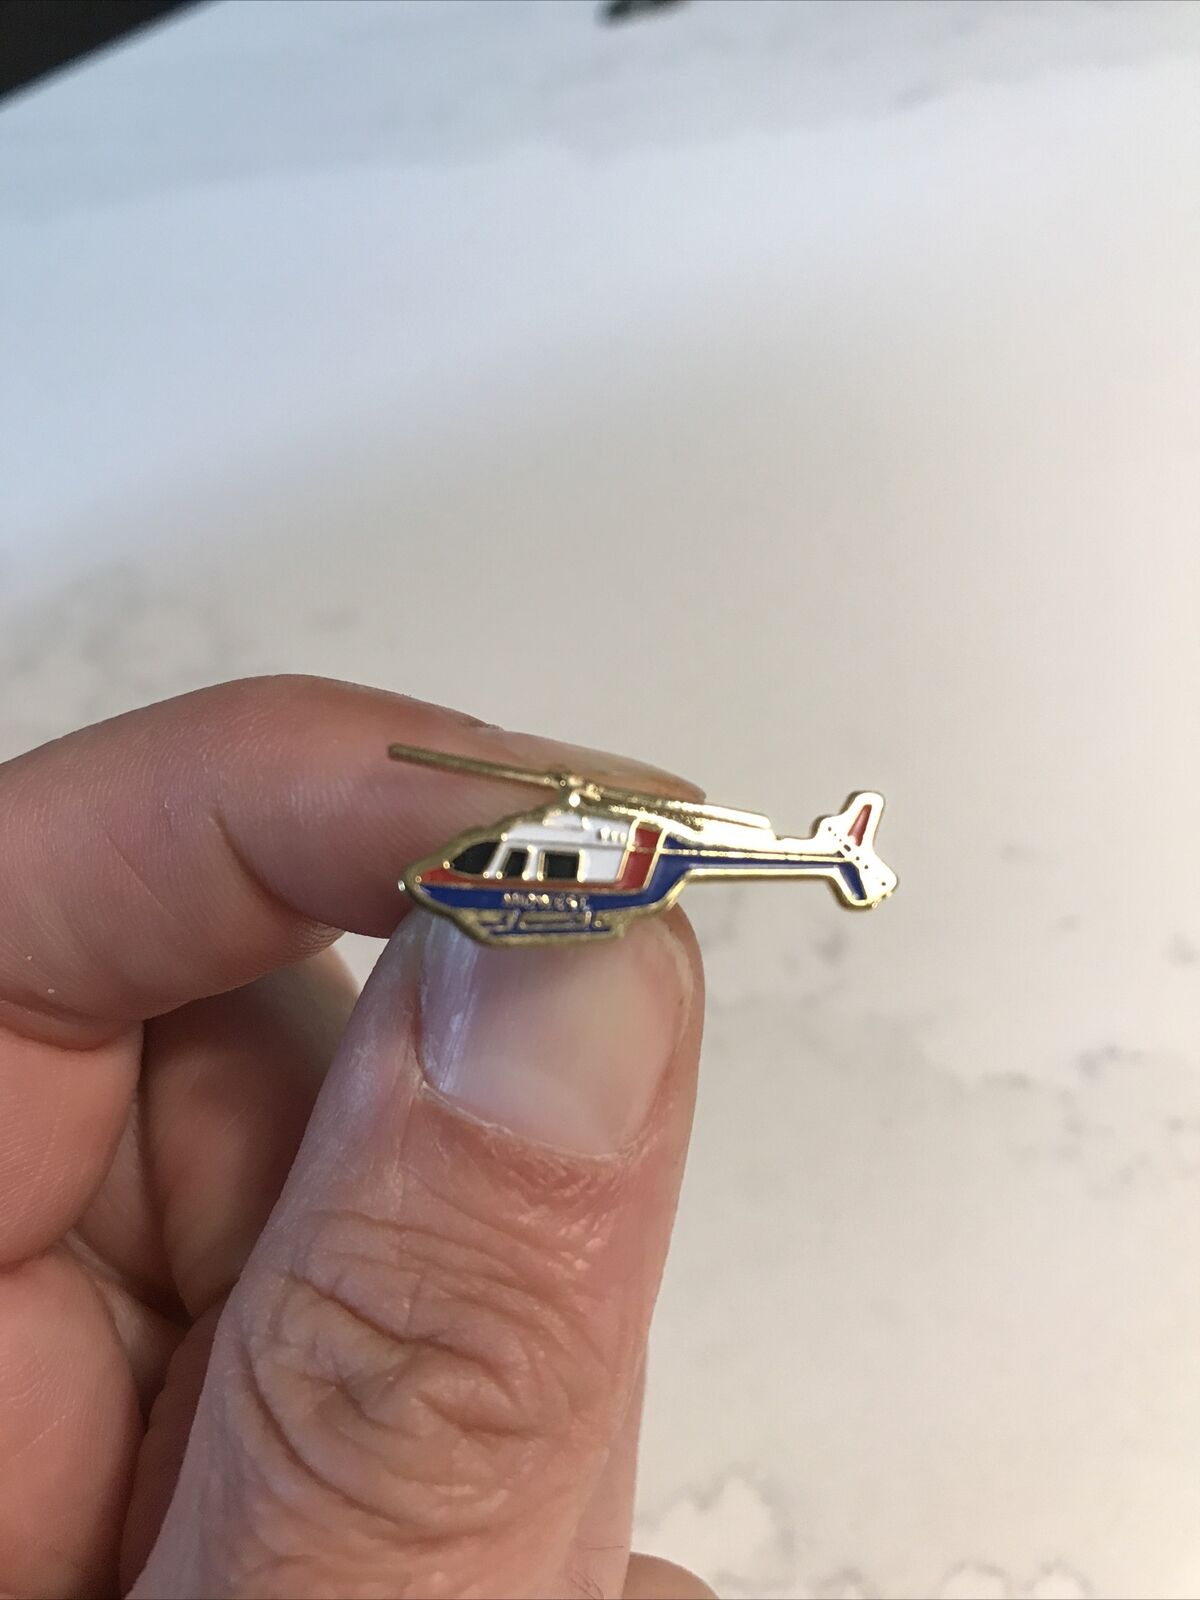 Midwest Helicopter Lapel Pin